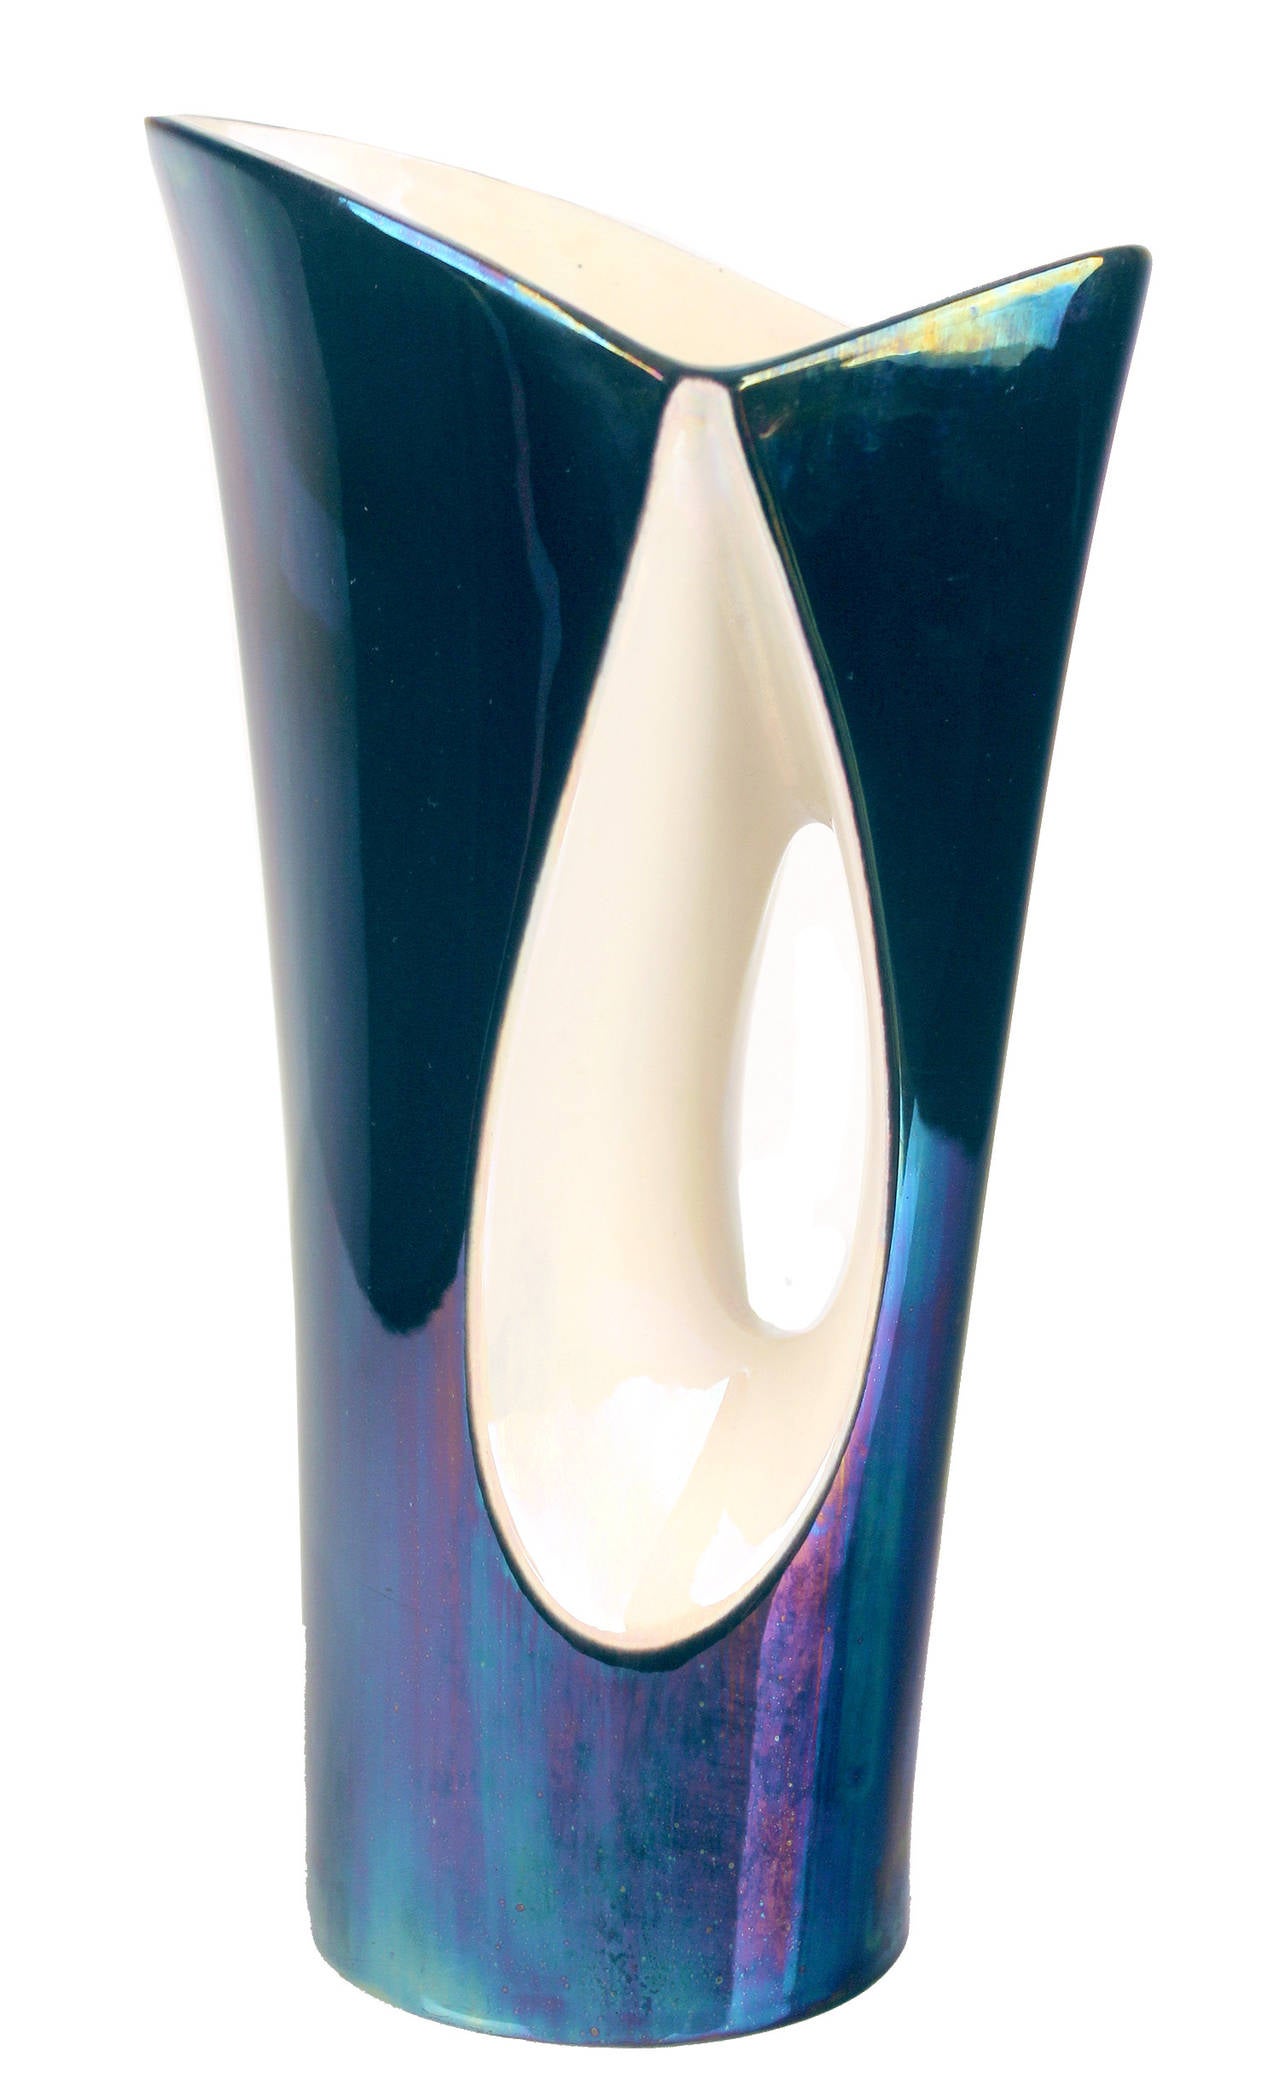 Vintage 60s French Mid Century Vase by Verceram,  the ivory with mother of pearl effect and blue/black iridescent finish is a signature of the verceram brand, the organic shape bears the typical signature of french mid century style